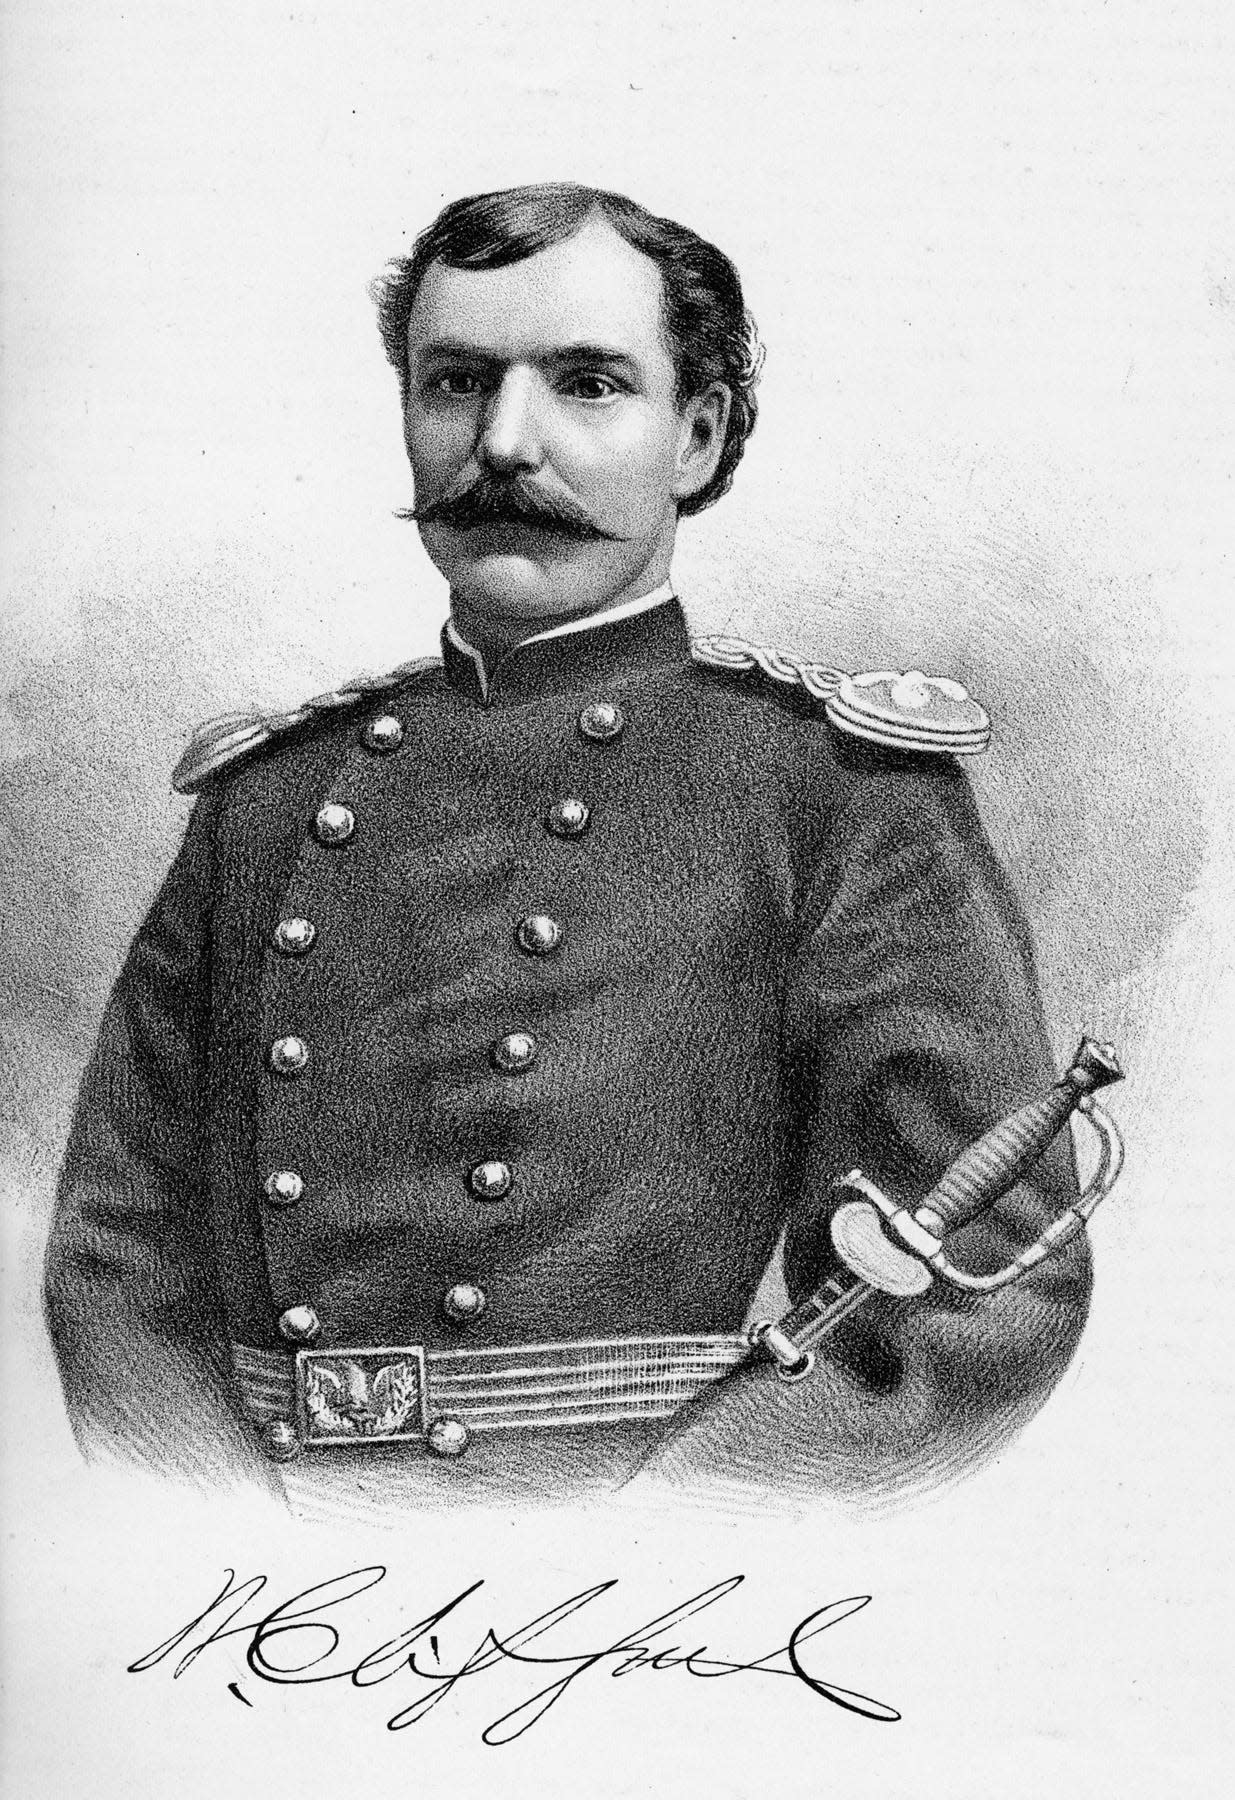 Captain Walter Clifford, citizen of Charlevoix.